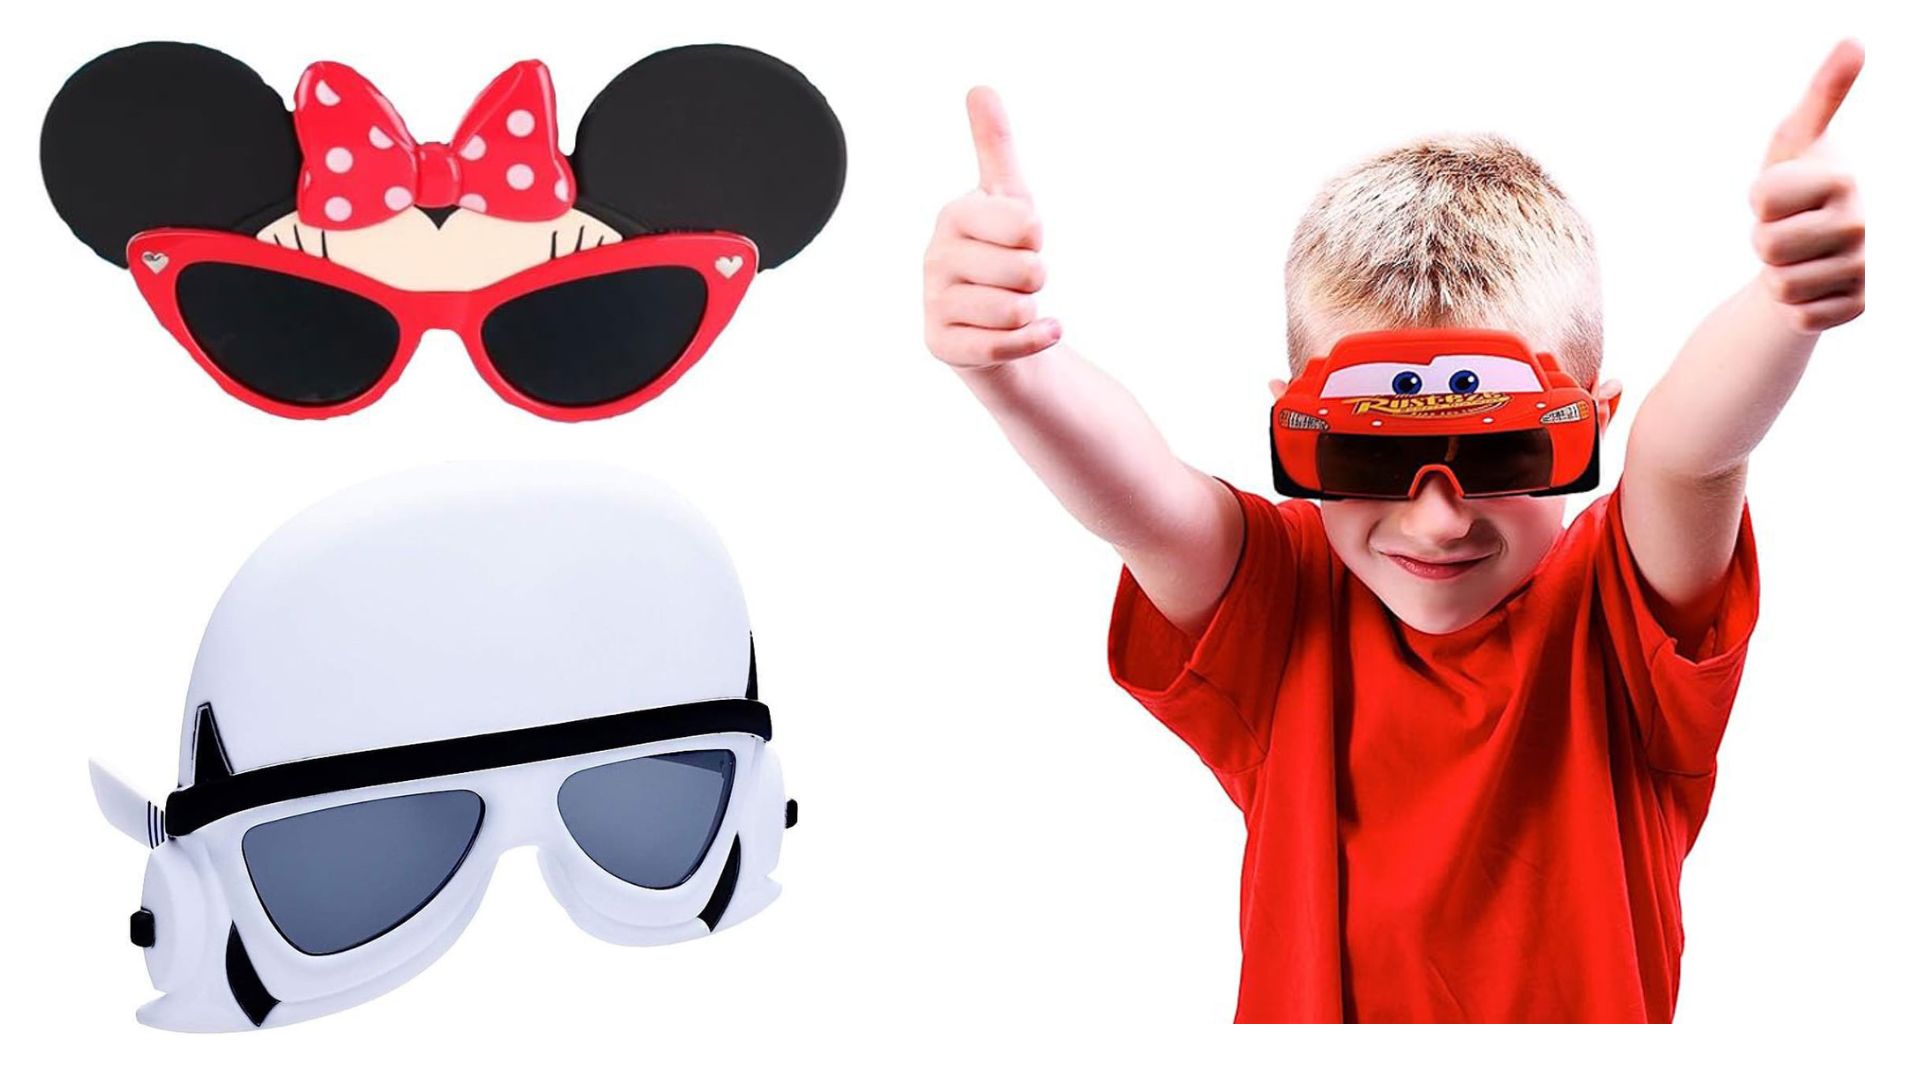 Minnie Mouse and Stormtrooper sunglasses and a child doing a thumbs up wearing Lightning McQueen sunglasses